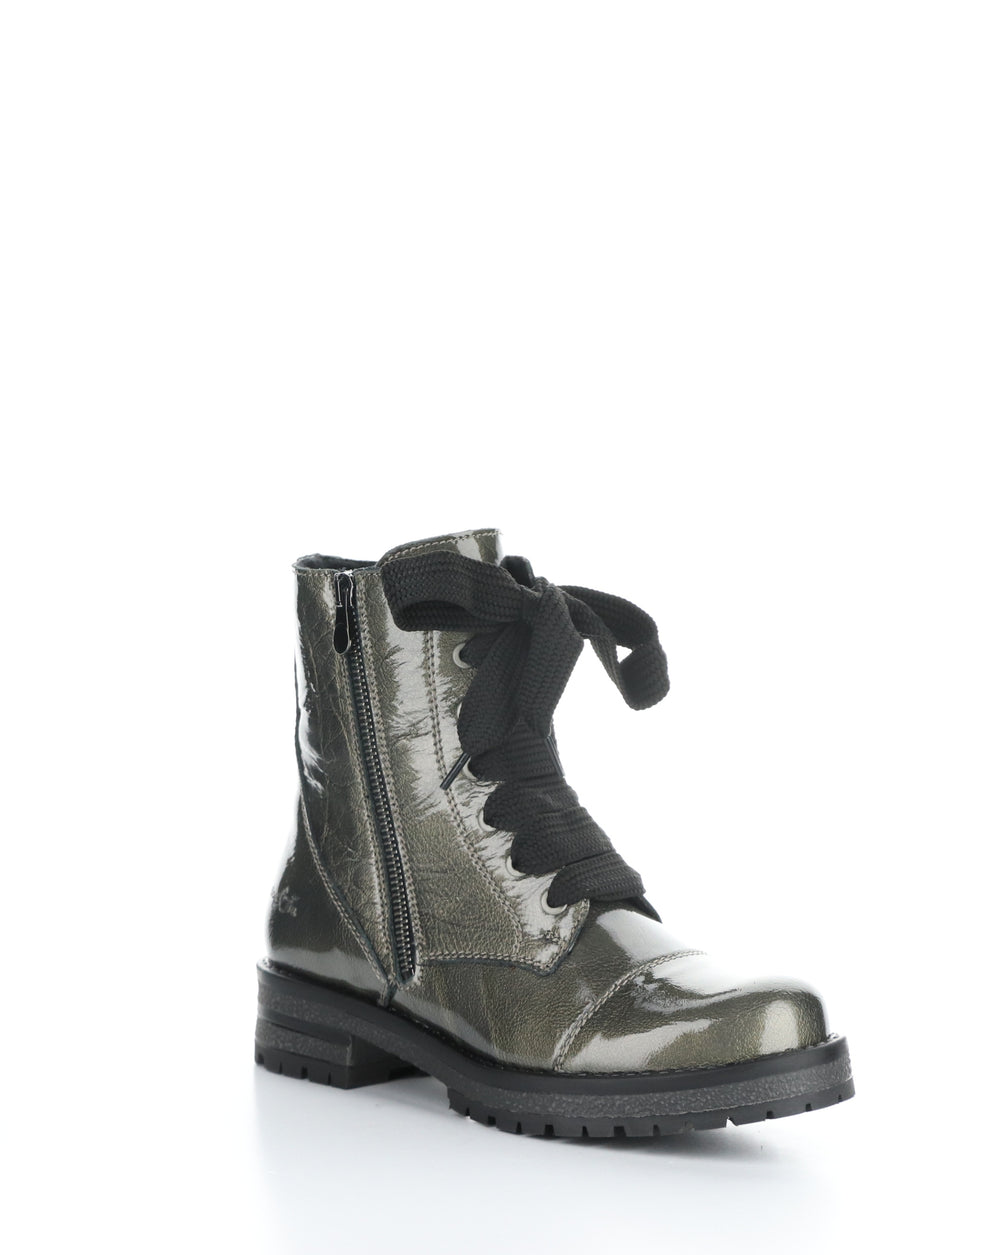 PAULIE PEWTER Round Toe Boots